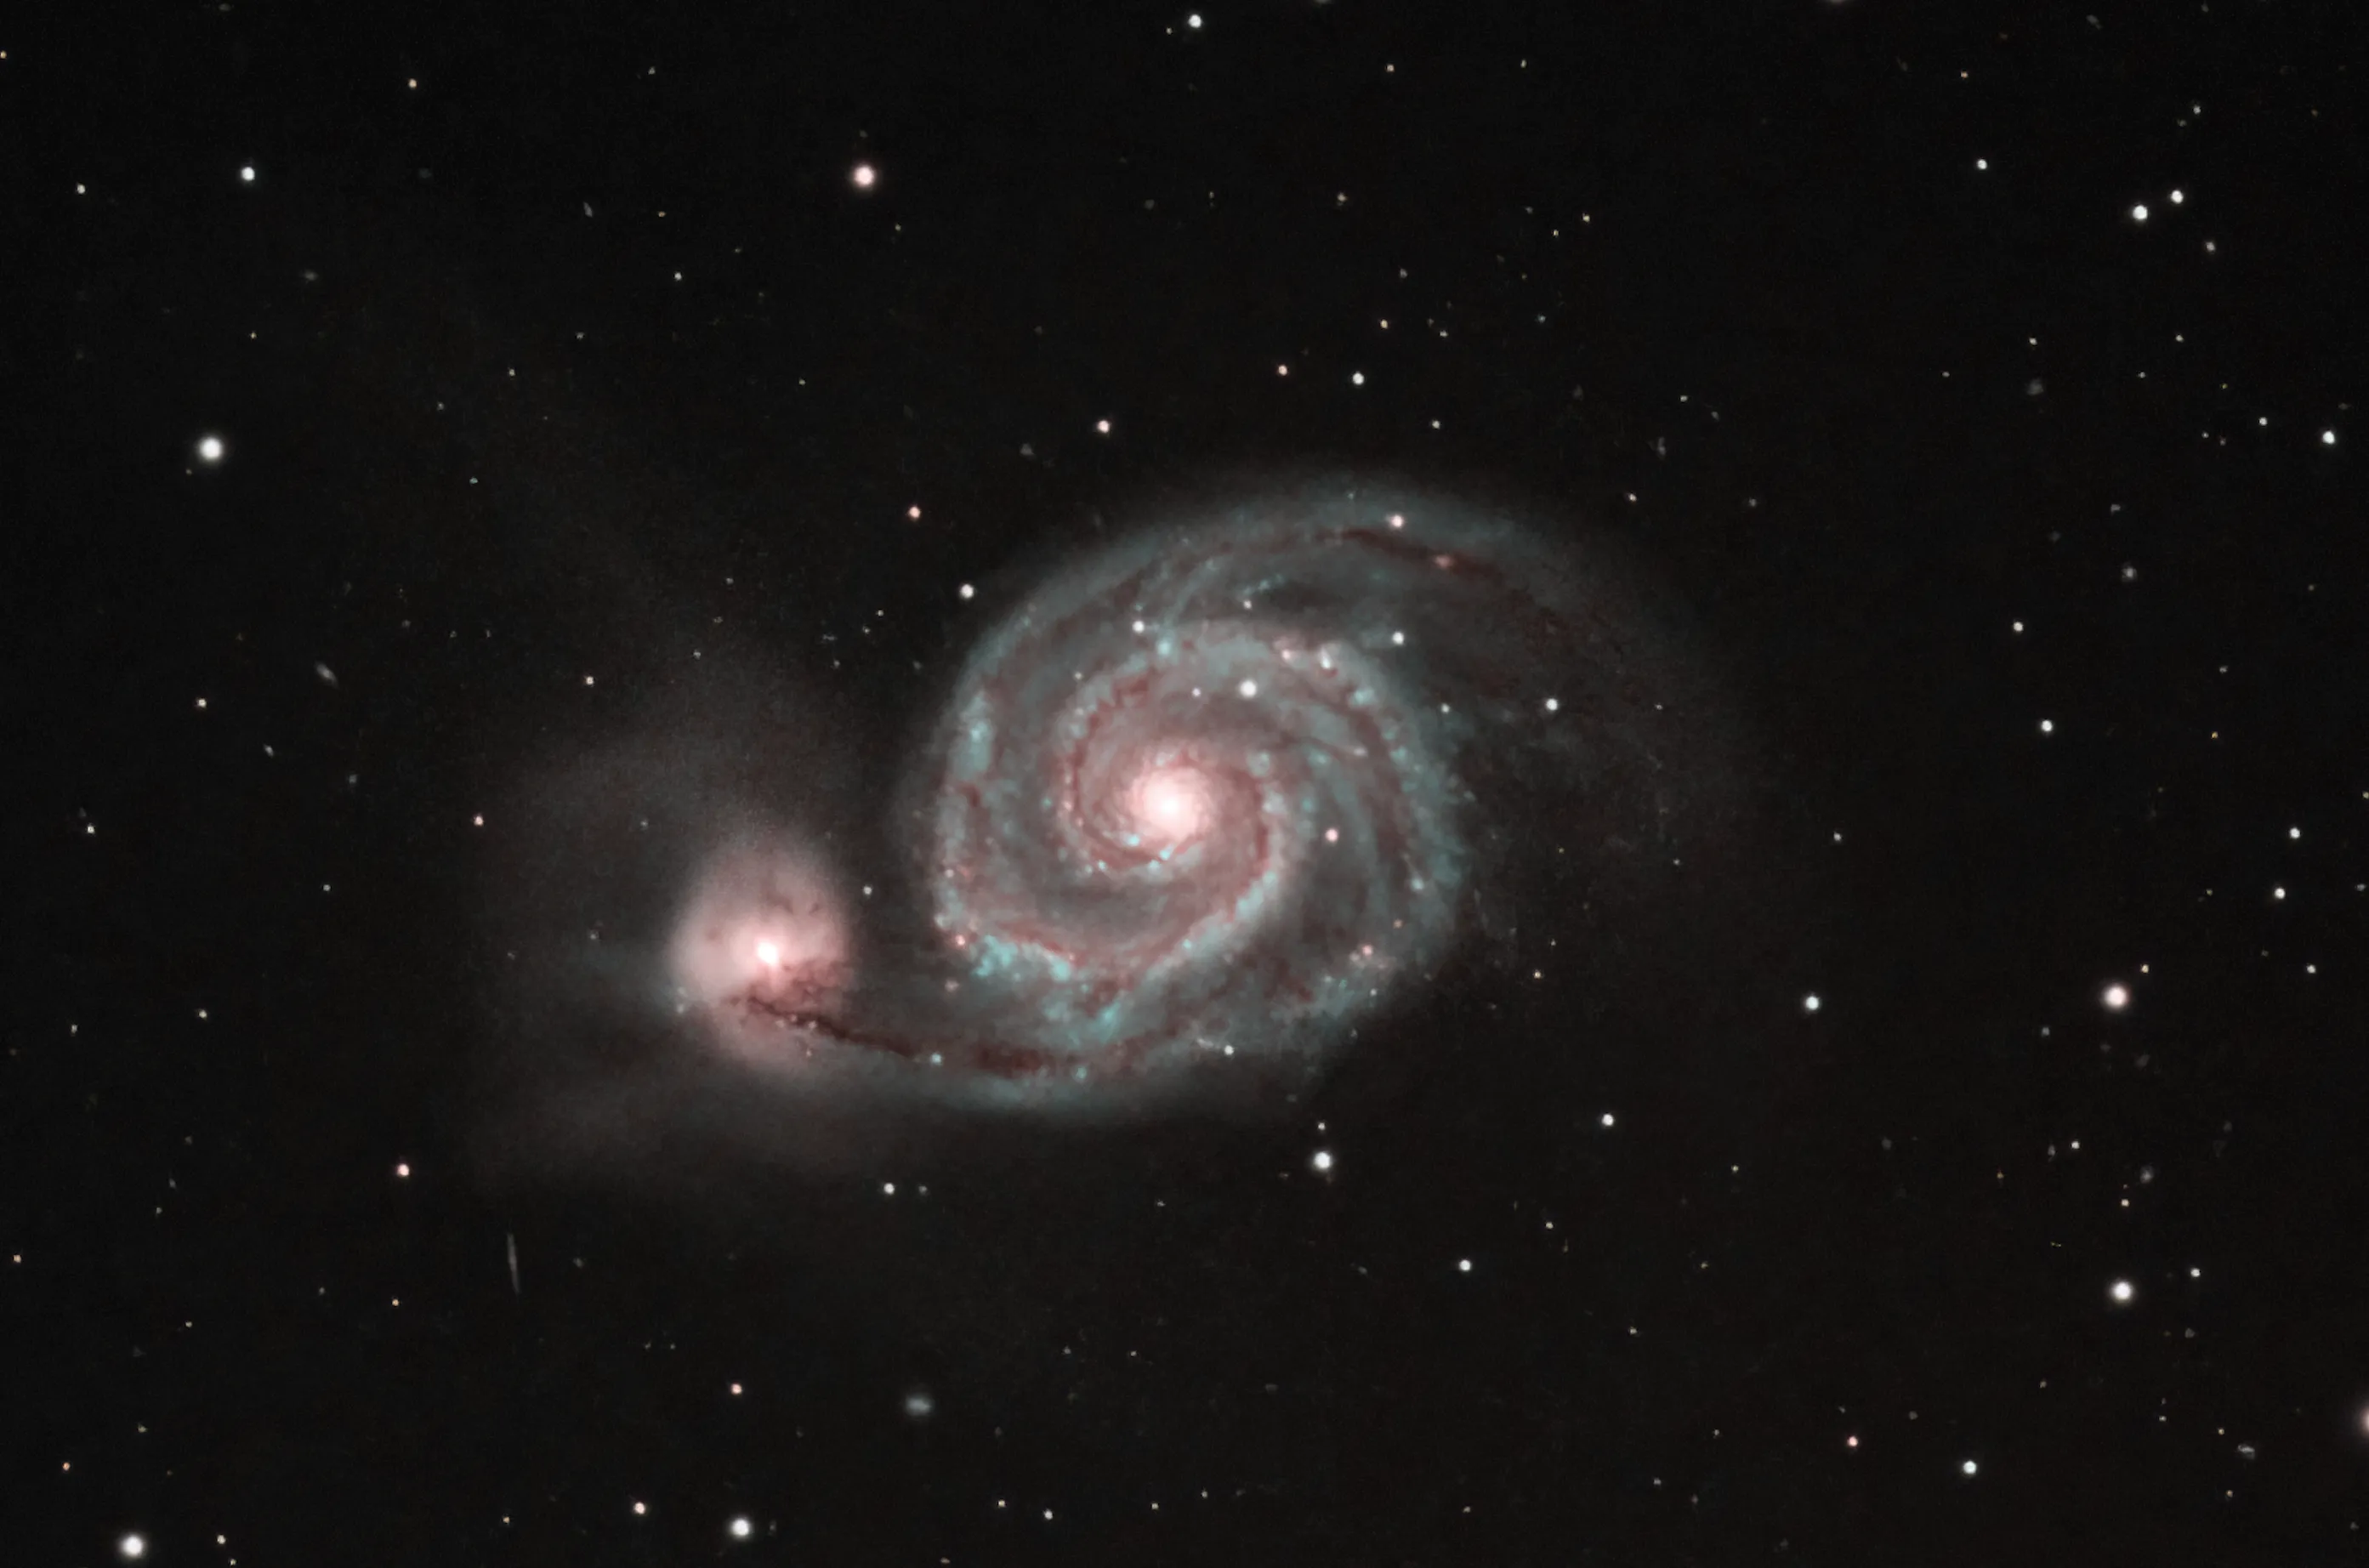 M51 galaxy astrophoto by Richard Harris zoomed in.